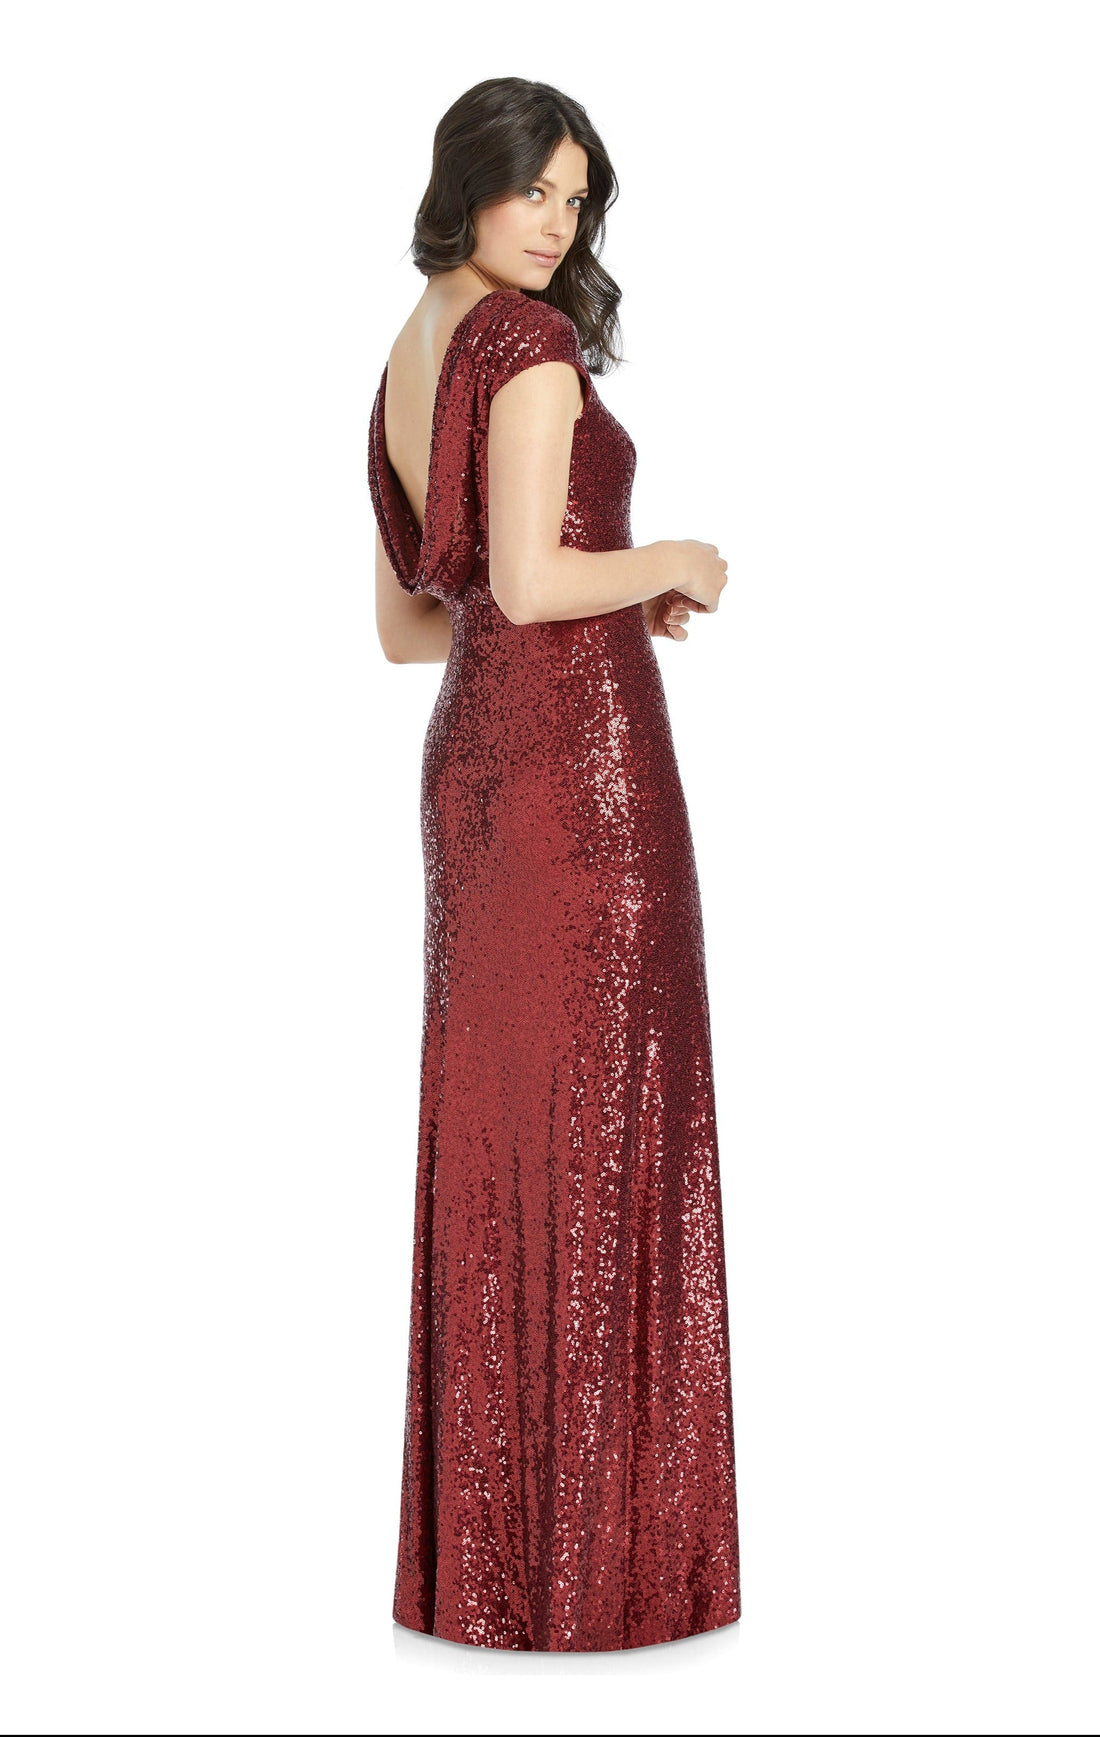 [Same day shipping] Cap sleeve sequin dress 3043 Burgundy US4